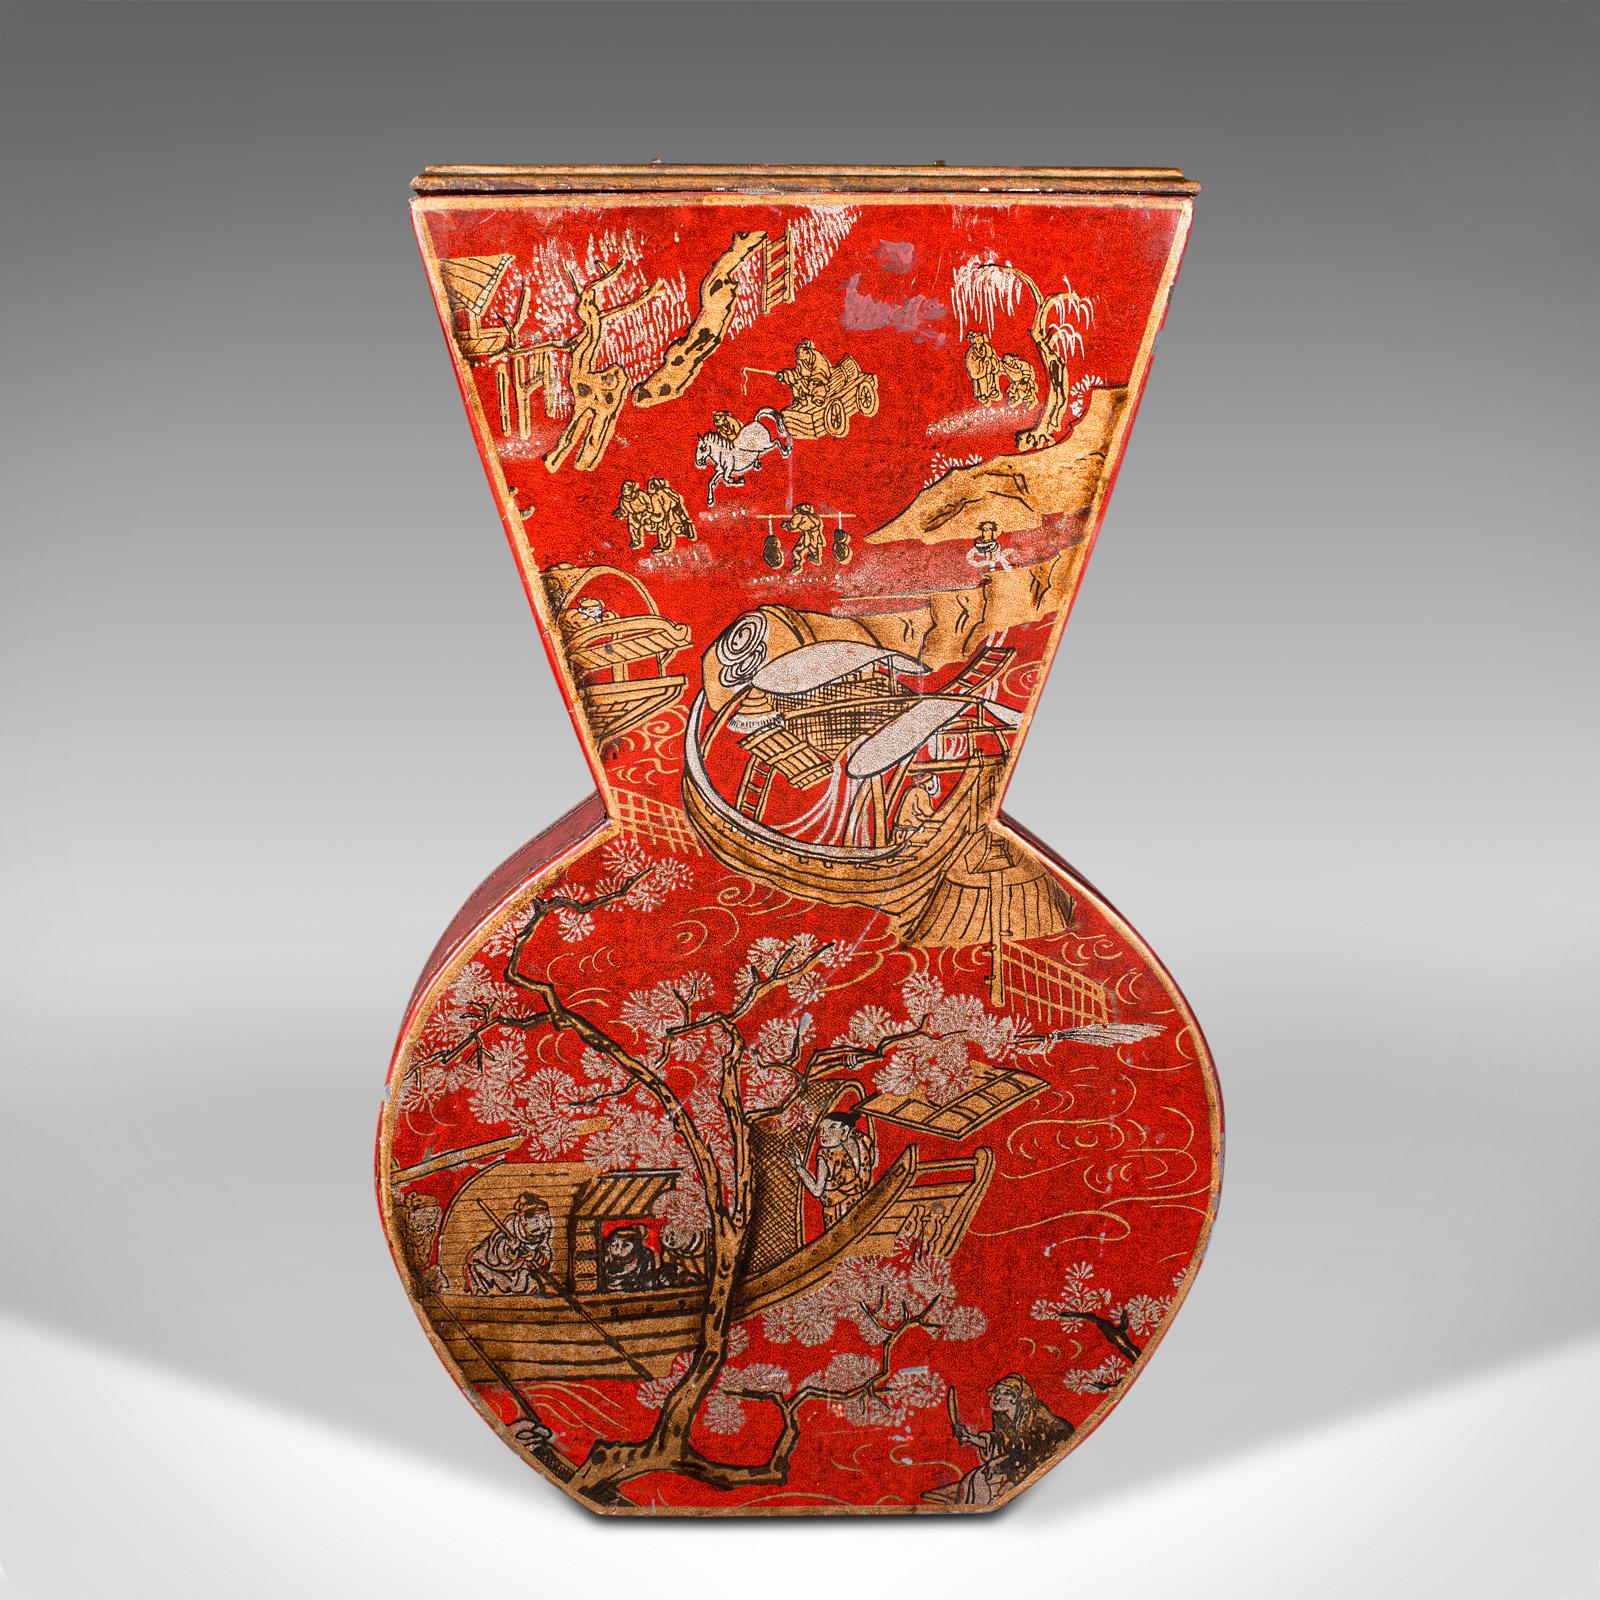 This is a vintage dried flower vase. A Chinese, waxed paper over board decorative drum vase, dating to the late 20th century, circa 1970.

Striking colour and gilt decor accentuates the Chinoiserie appeal
Displays a desirable aged patina